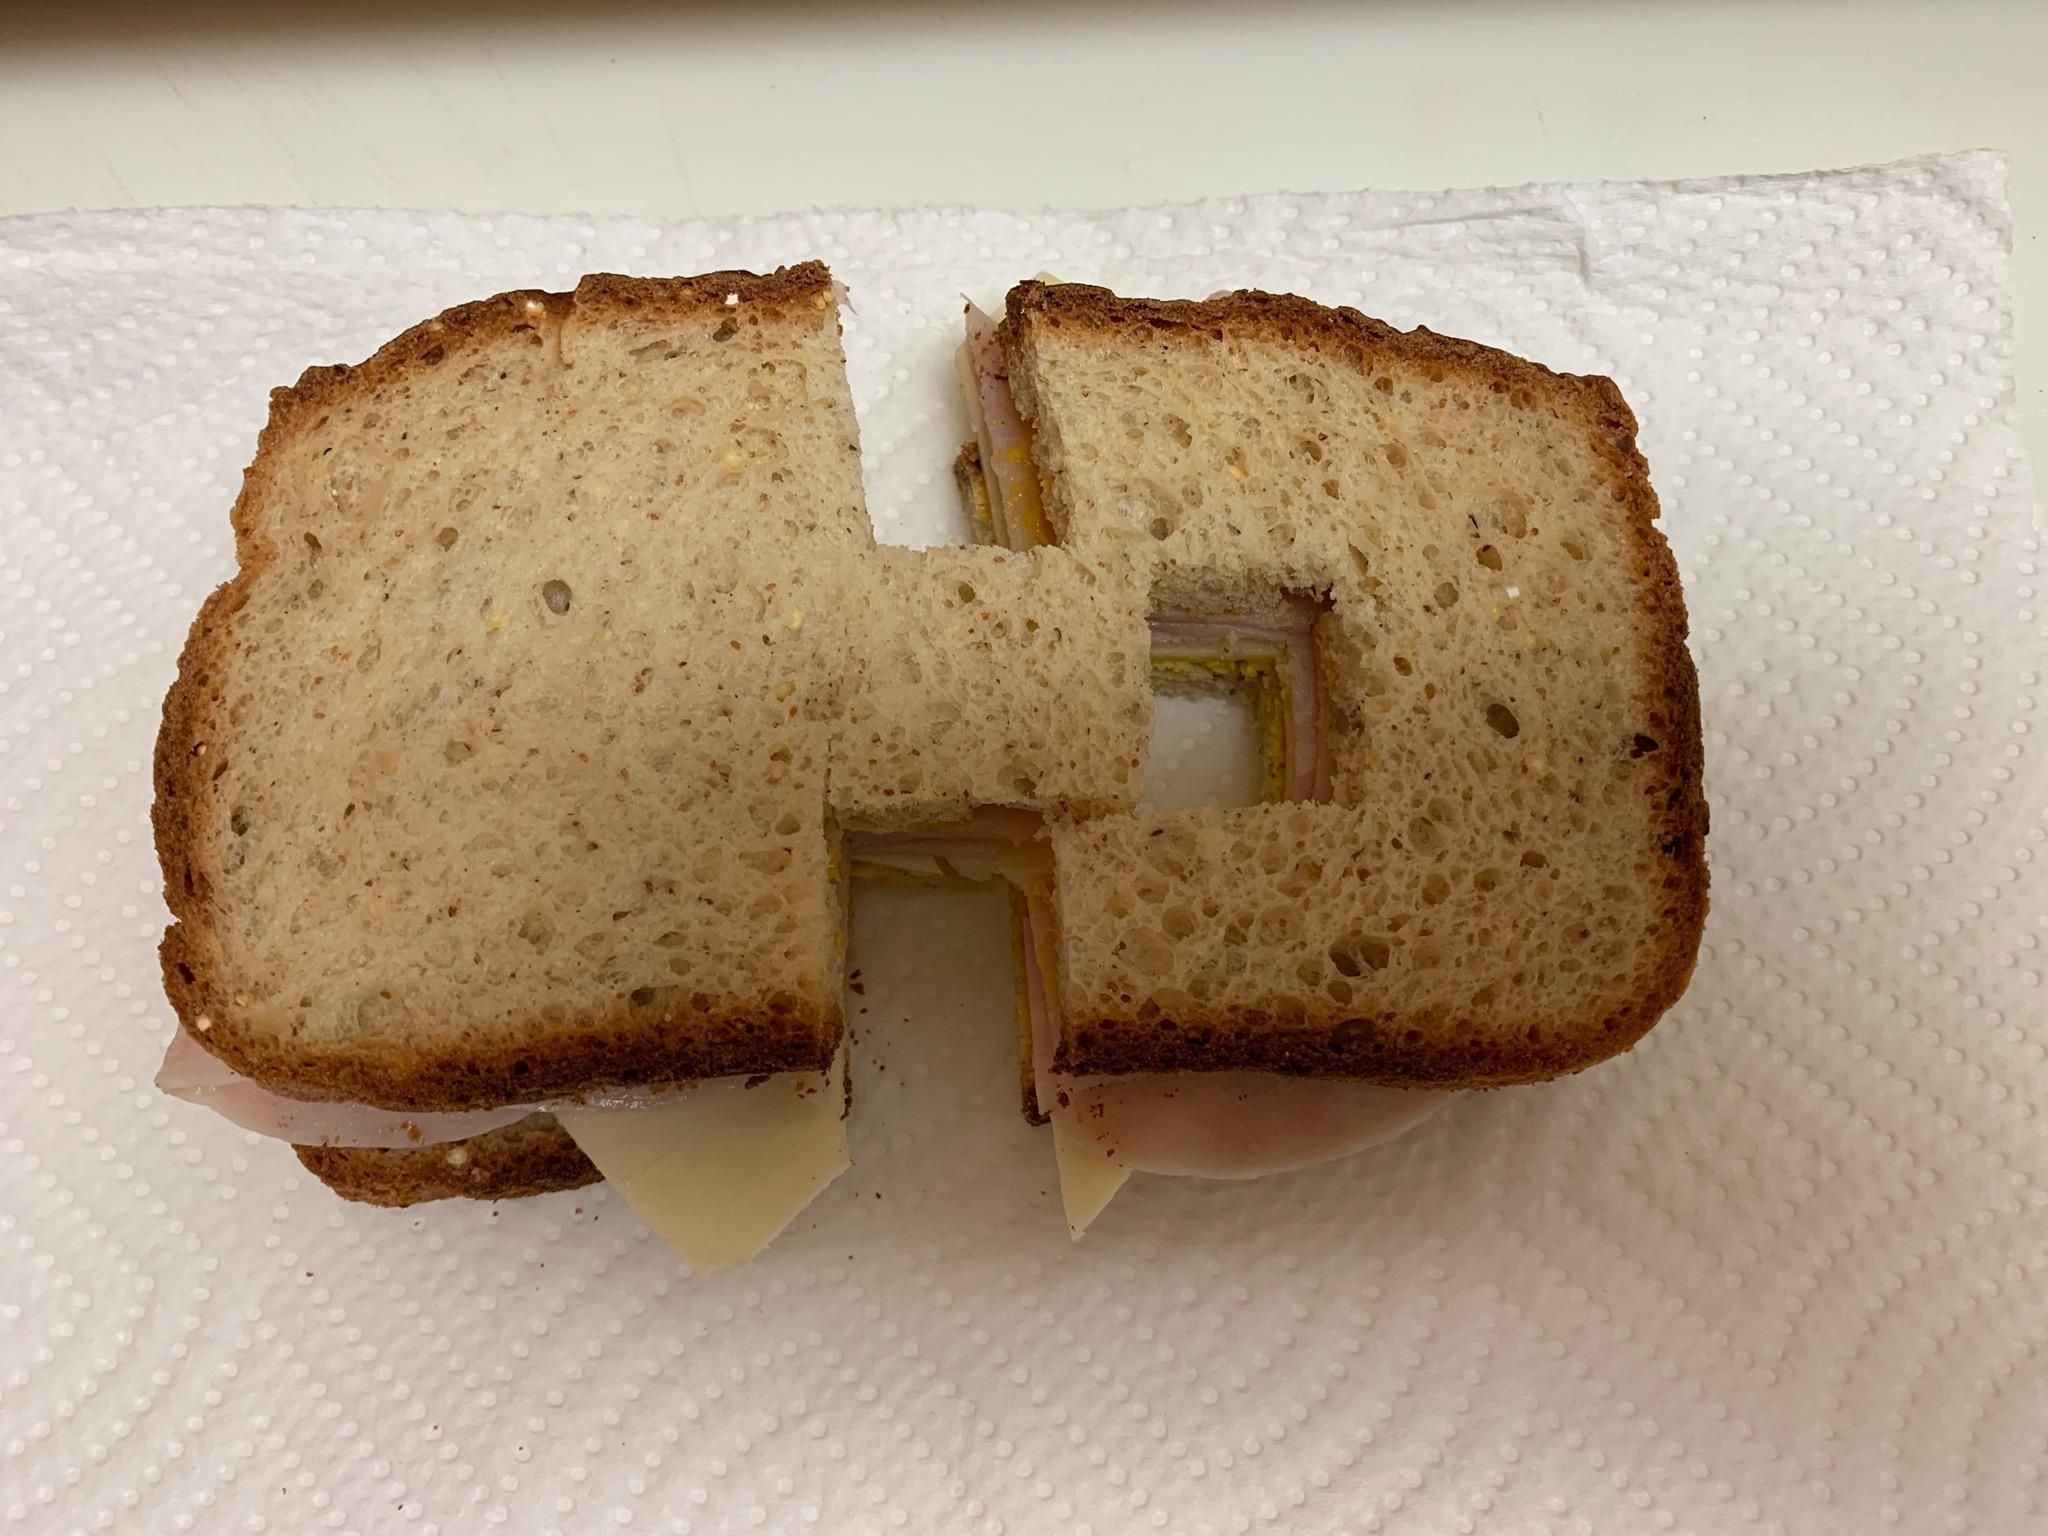 My daughter hates it when her sandwich is not cut perfect in half. My wife had to up her game to annoy her.